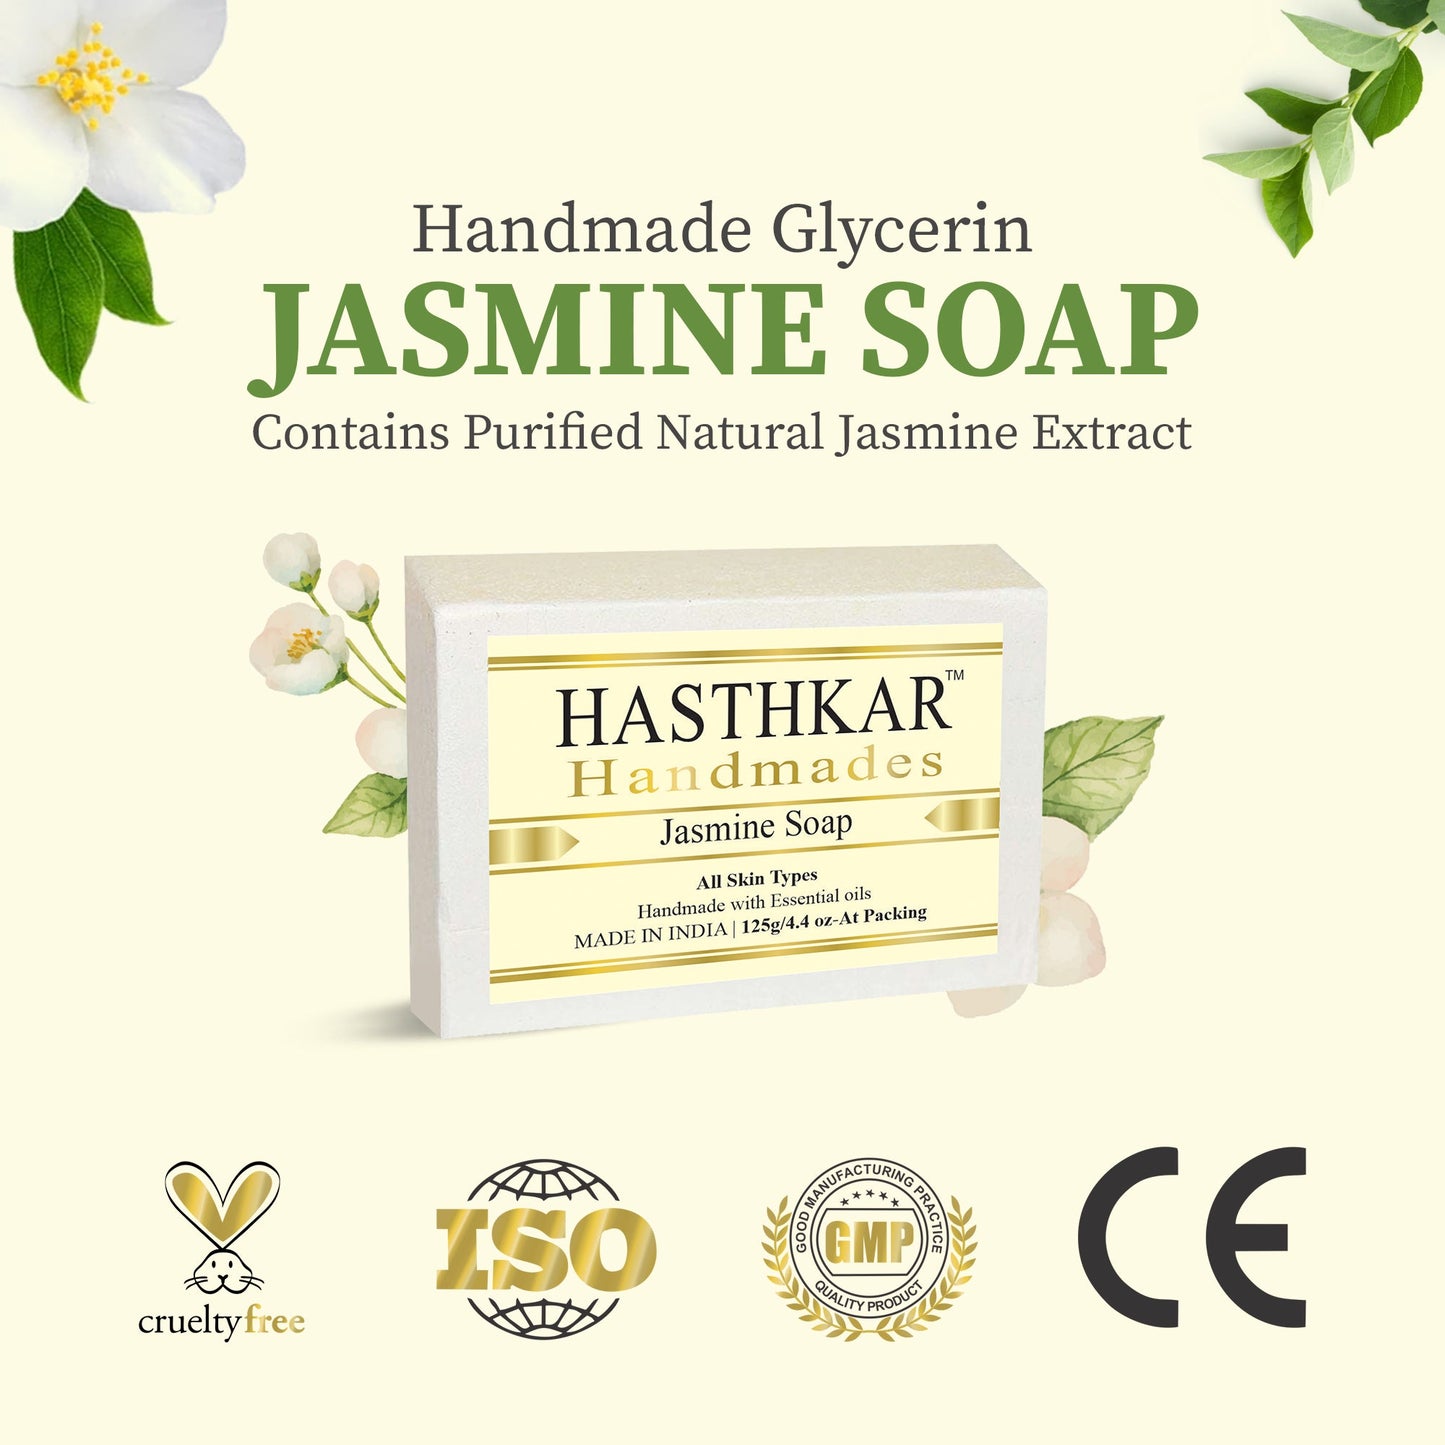 Hasthkar Handmades Glycerine Jasmine Soap For Improve Your Skin Tone And Texture | Helps To Expand Skin'S Flexibility | Helps Balance Dampness - 125Gm